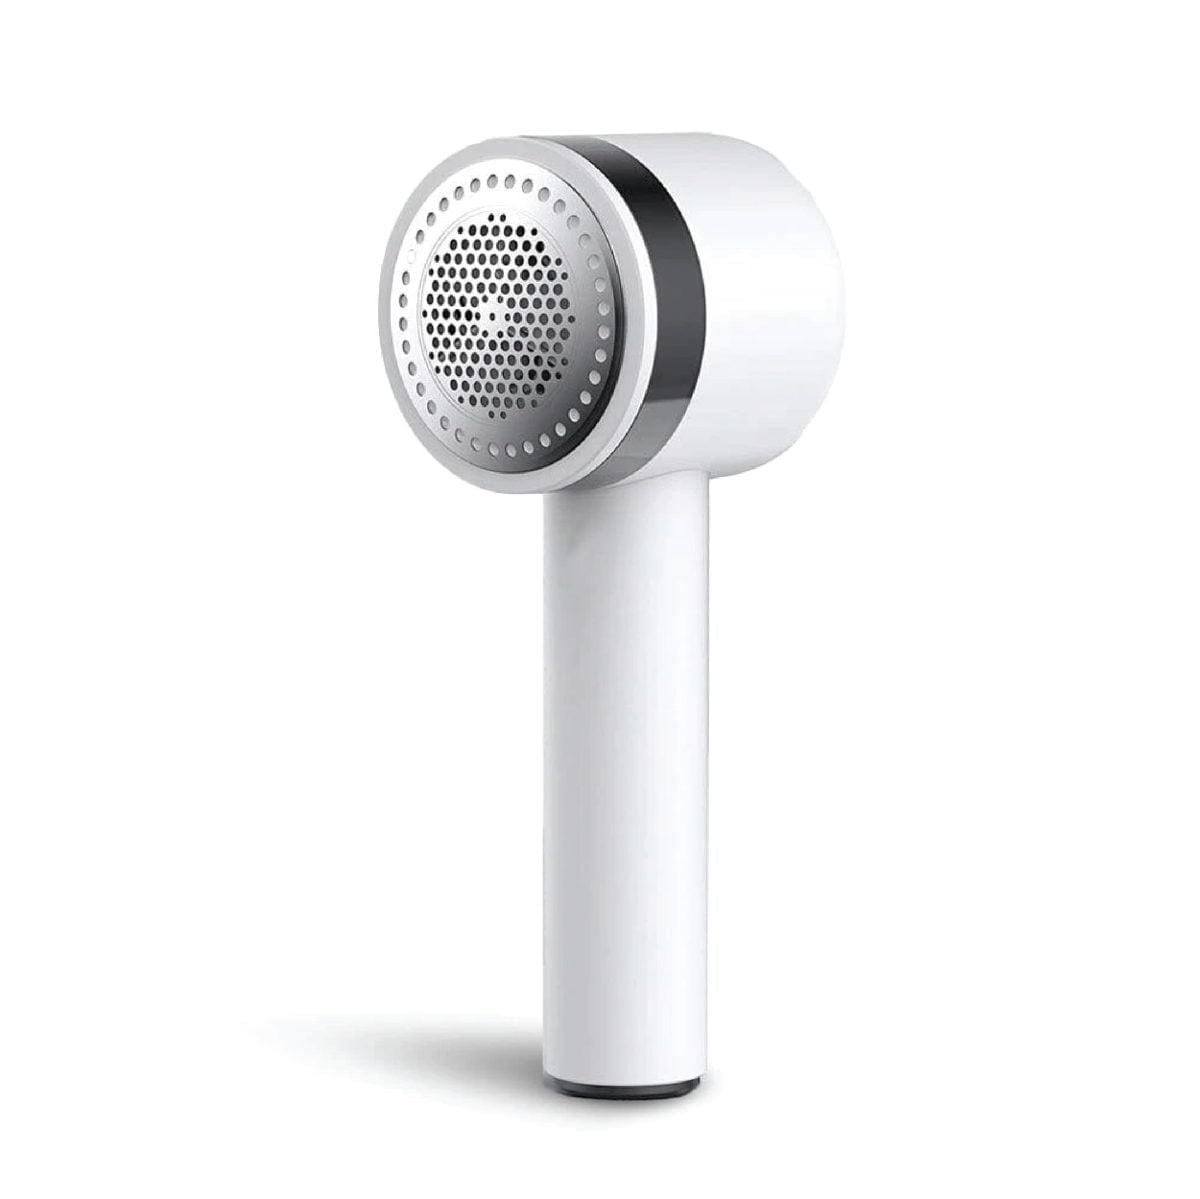 6 06 Xiaomi &Amp;Lt;Strong&Amp;Gt;Deerma Clothes Sticky Hair Multi-Function Trimmer Charge Plug-In 7000R / Min Motor Fast Removal Ball&Amp;Lt;/Strong&Amp;Gt; Concealed Multi-Purpose Sticky Hair Tube Easily Remove Dander, Clean As New. The &Amp;Lt;Strong&Amp;Gt;Sticky Hair Tube&Amp;Lt;/Strong&Amp;Gt; Is Hidden At The Handle To Maximize The Space Utilization. Pulling It Out Can Absorb The Residual Dander, Effectively Preventing The Dander And The Clothes Fiber From Winding Up Again. Easy To Operate, Make Clothes New And Fashion Https://Youtu.be/Cbkpzs7Ufpa Xiaomi Deerma Portable Lint Remover Multi-Function Usb Charging